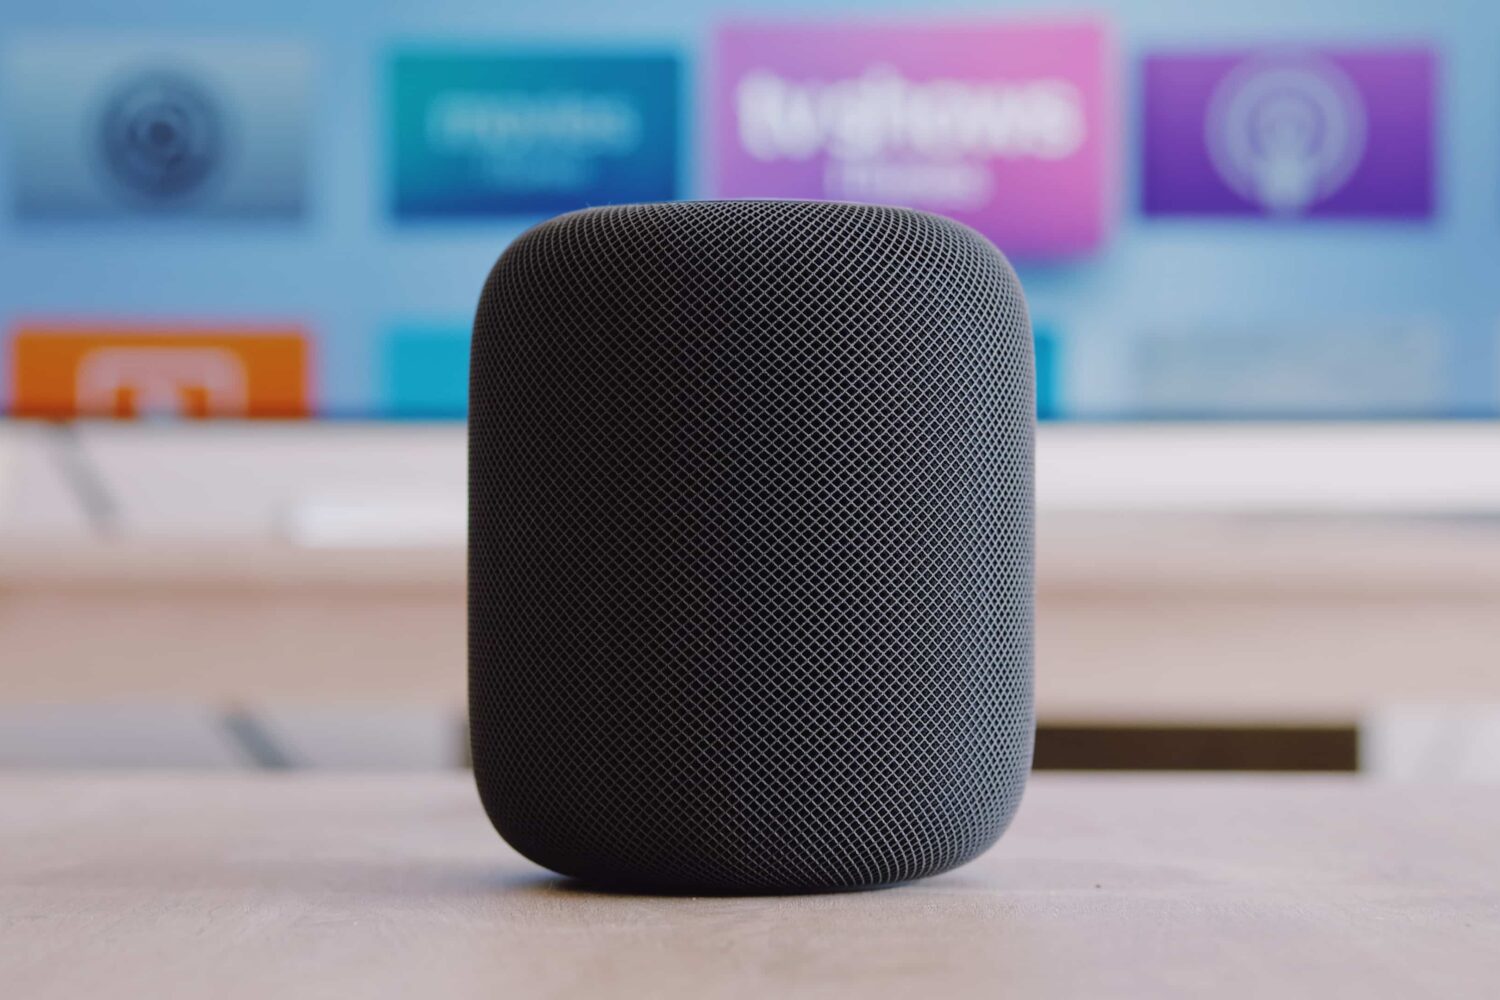 A black Apple HomePod wireless speaker laying on a table in front of a TV set which displays an Apple TV home screen